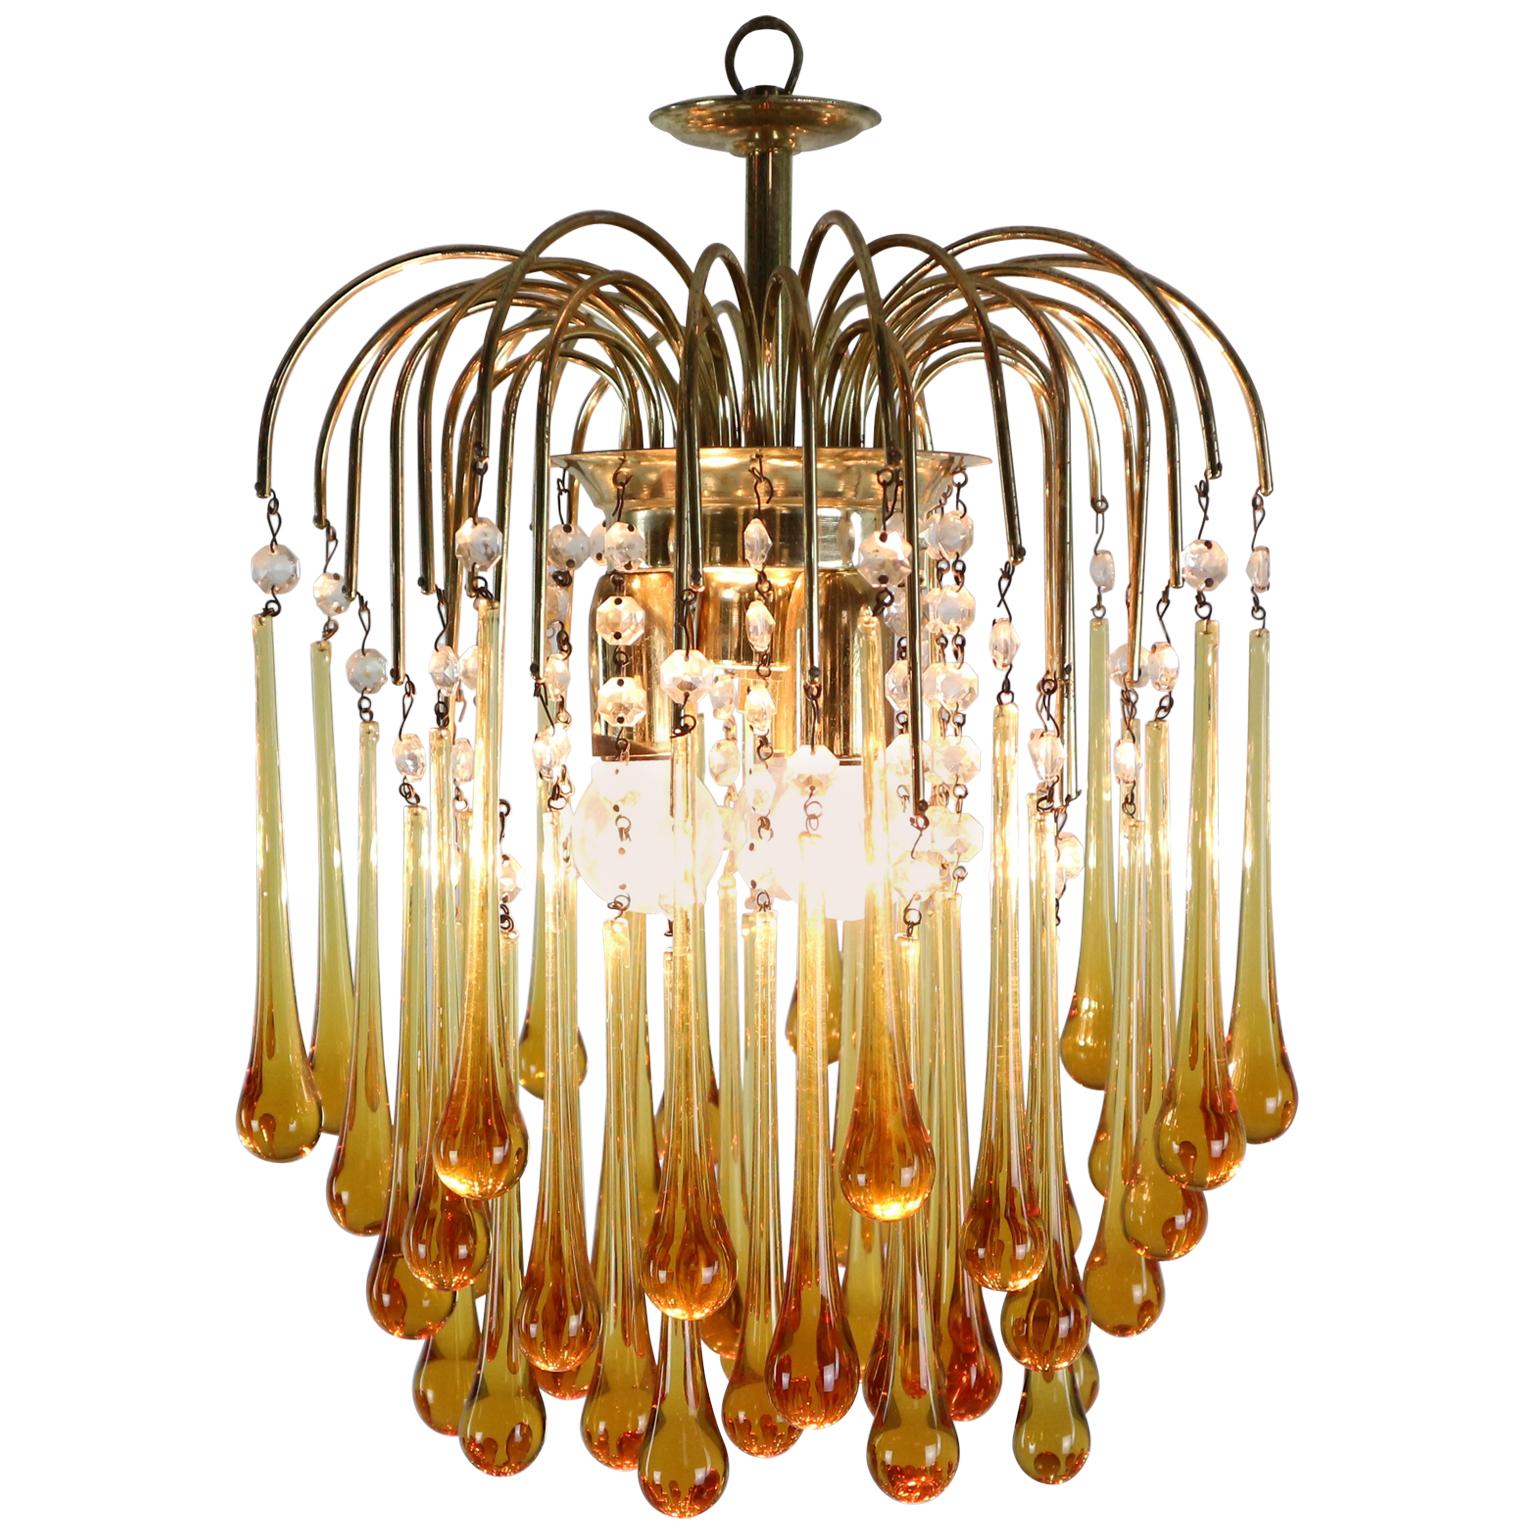 Vintage Murano Amber Glass Tear Drop Chandelier by Paolo Vanini, 1960 Italy